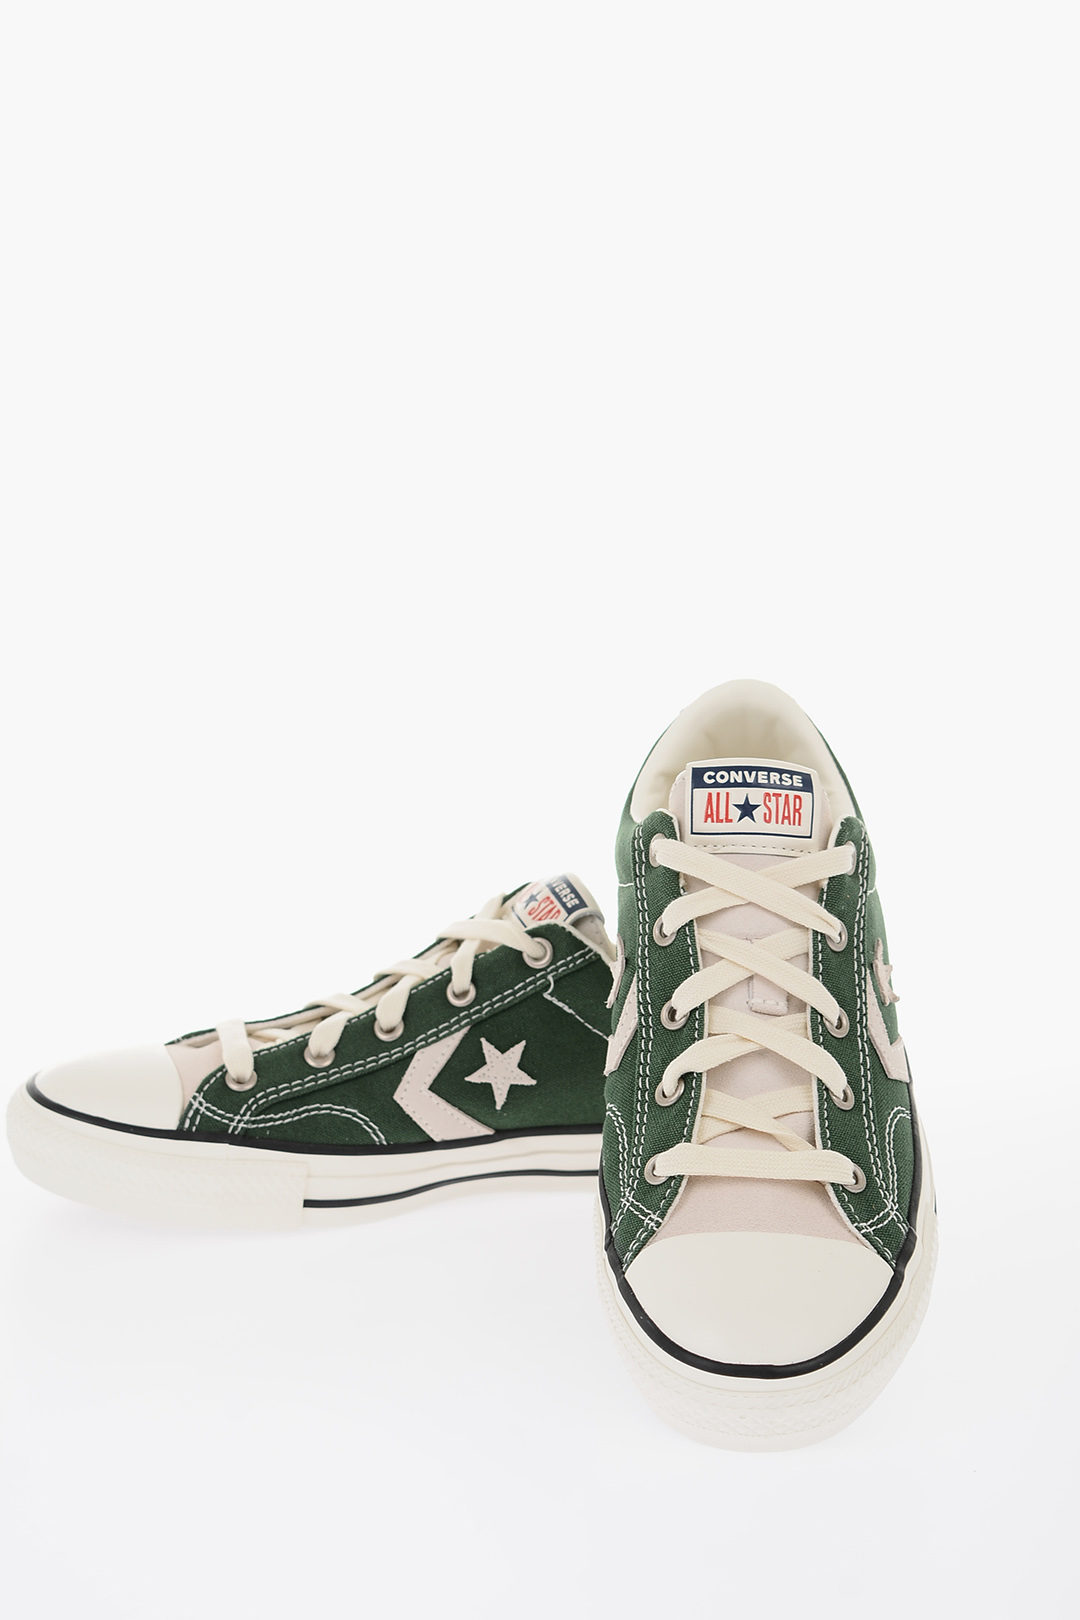 Converse ALL STAR PLAYER Fabric Sneakers - Glamood Outlet